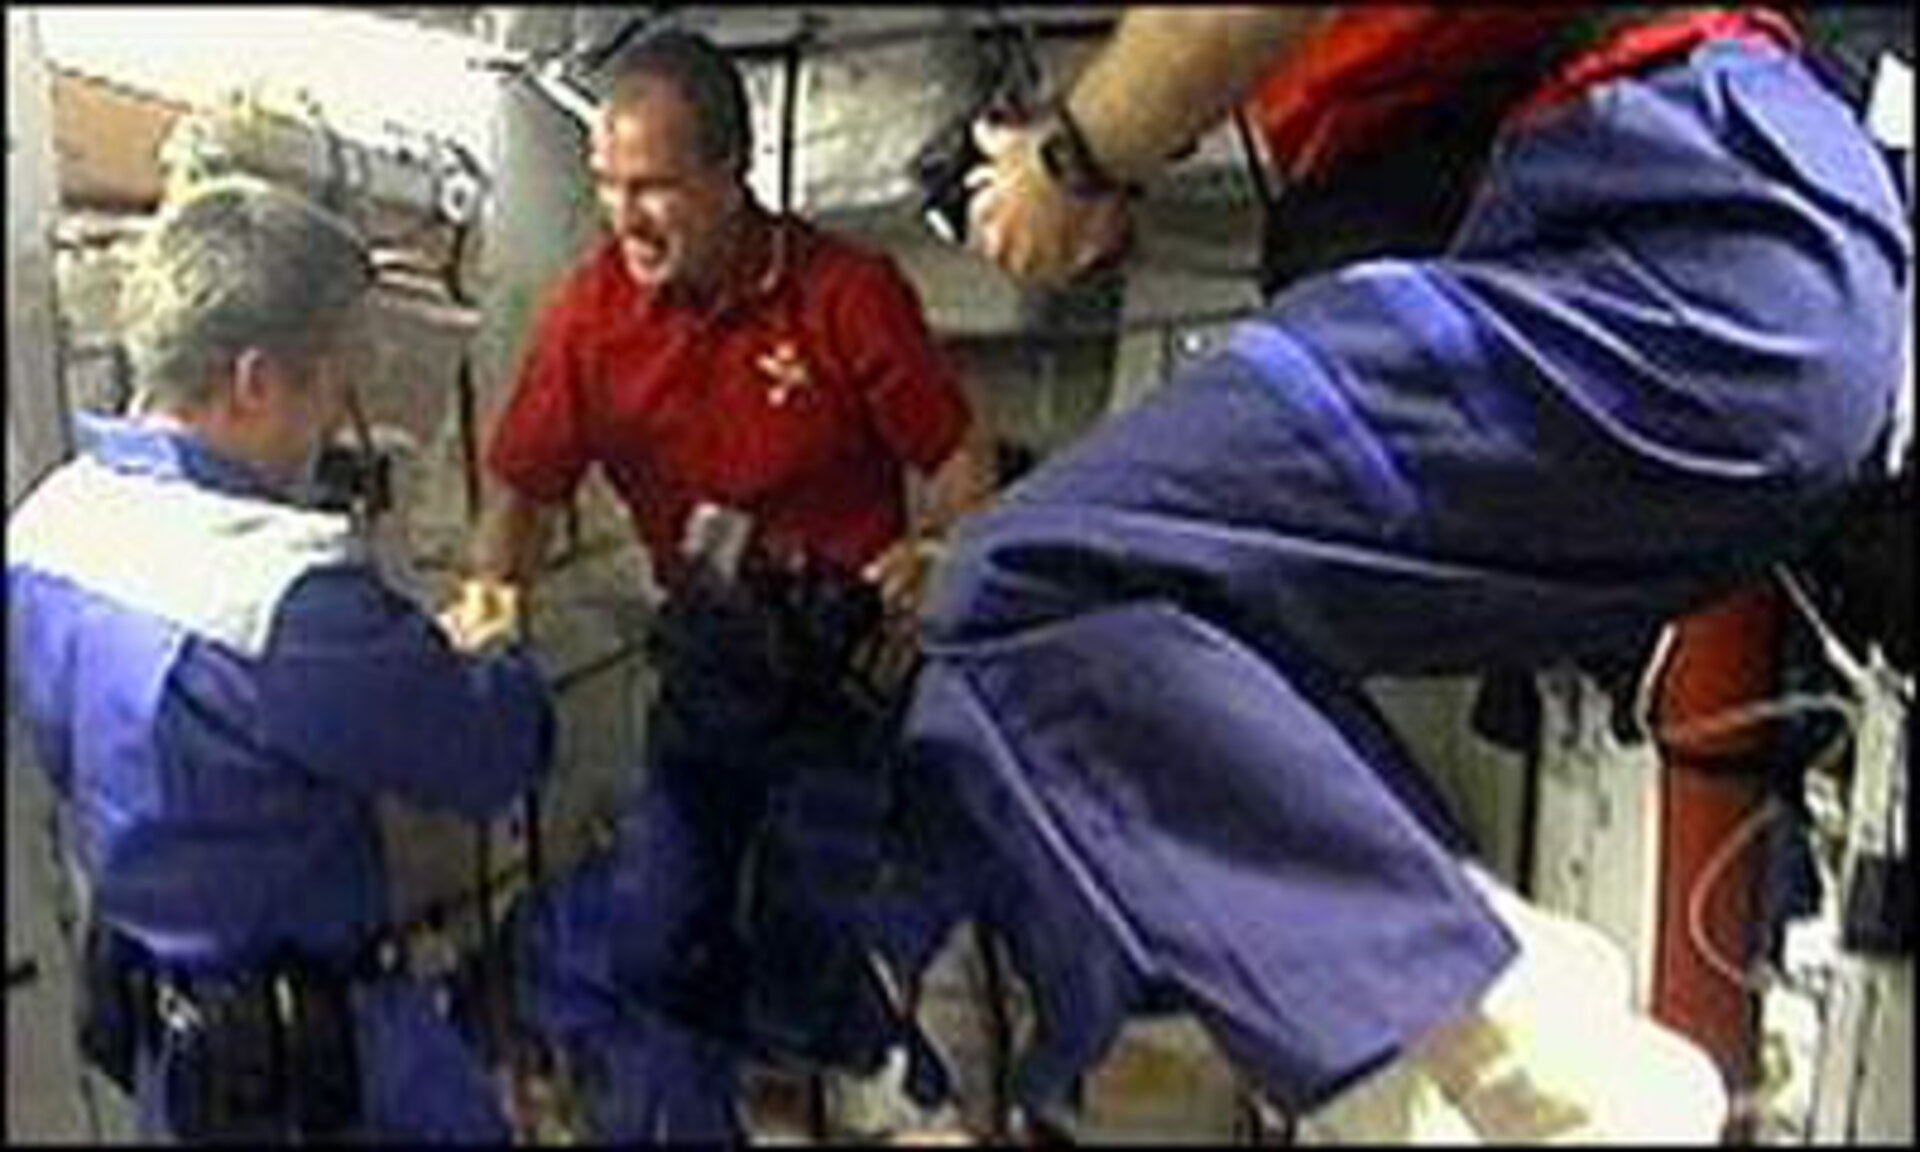 Brent Jett (in red) shakes hands with the ISS crew